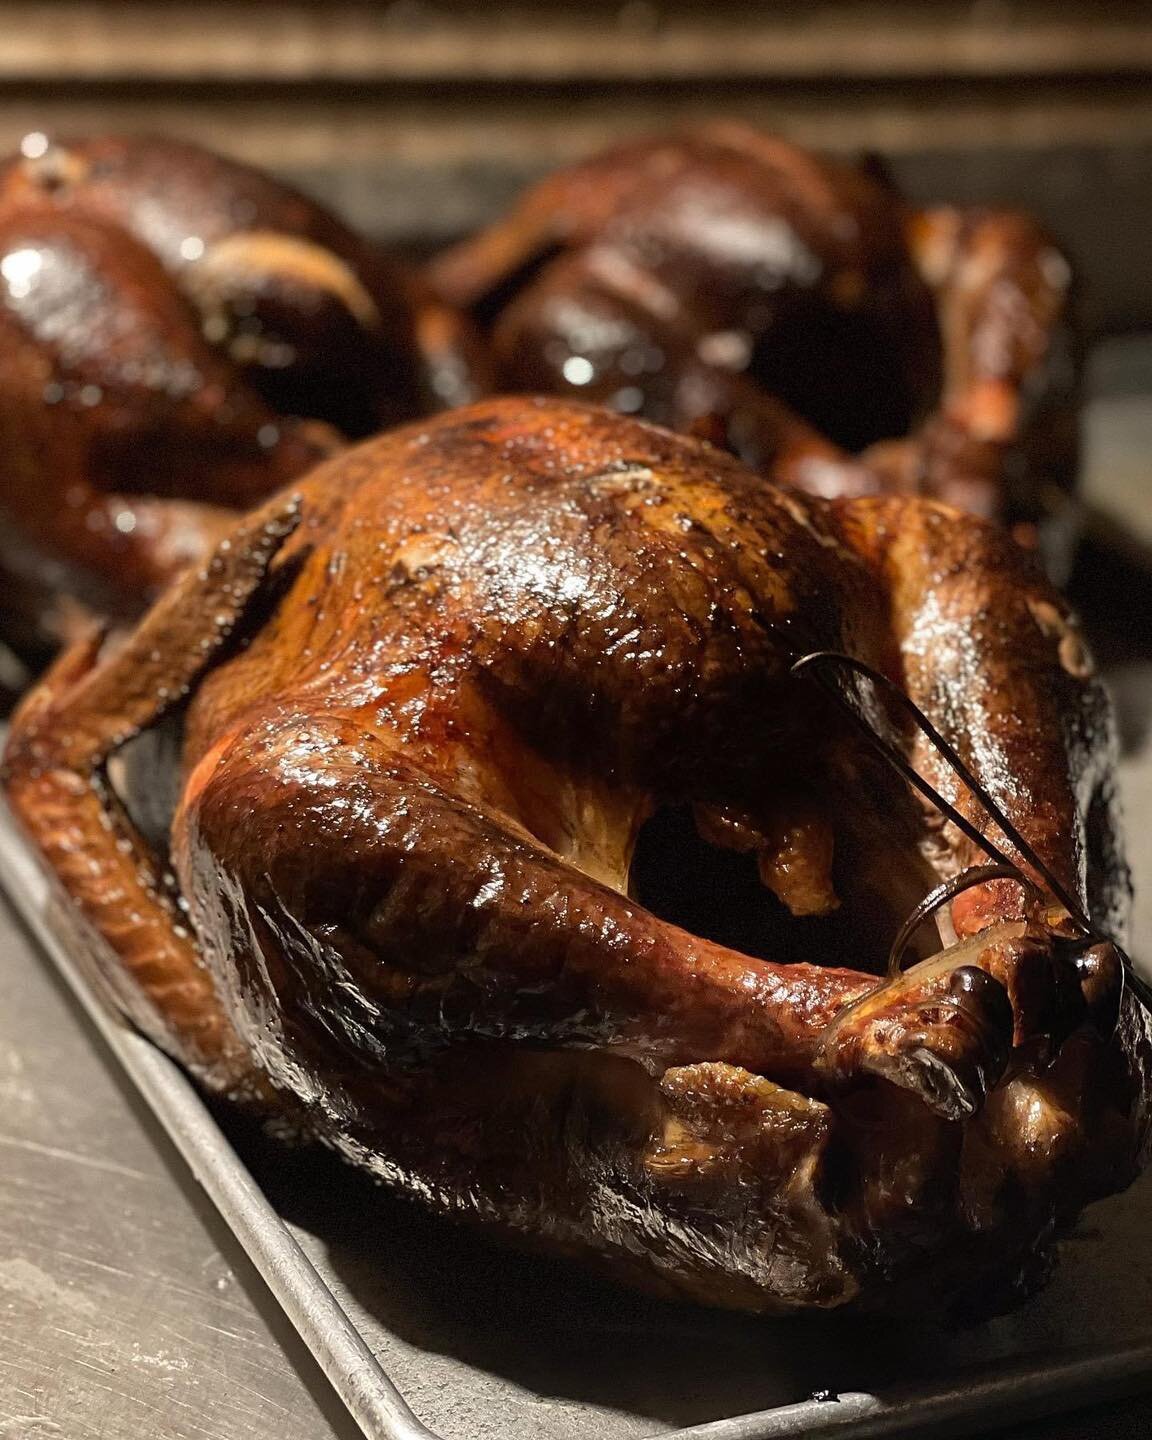 The holidays are coming up quick! Contact us at 903-432-9000 in order to reserve your smoked turkey or ham for your family&rsquo;s Thanksgiving dinner!

#smokedmeat #easttexas #texasbbq #cedarcreeklaketx #cedarcreeklake #cedarcreek #thelittlethings #